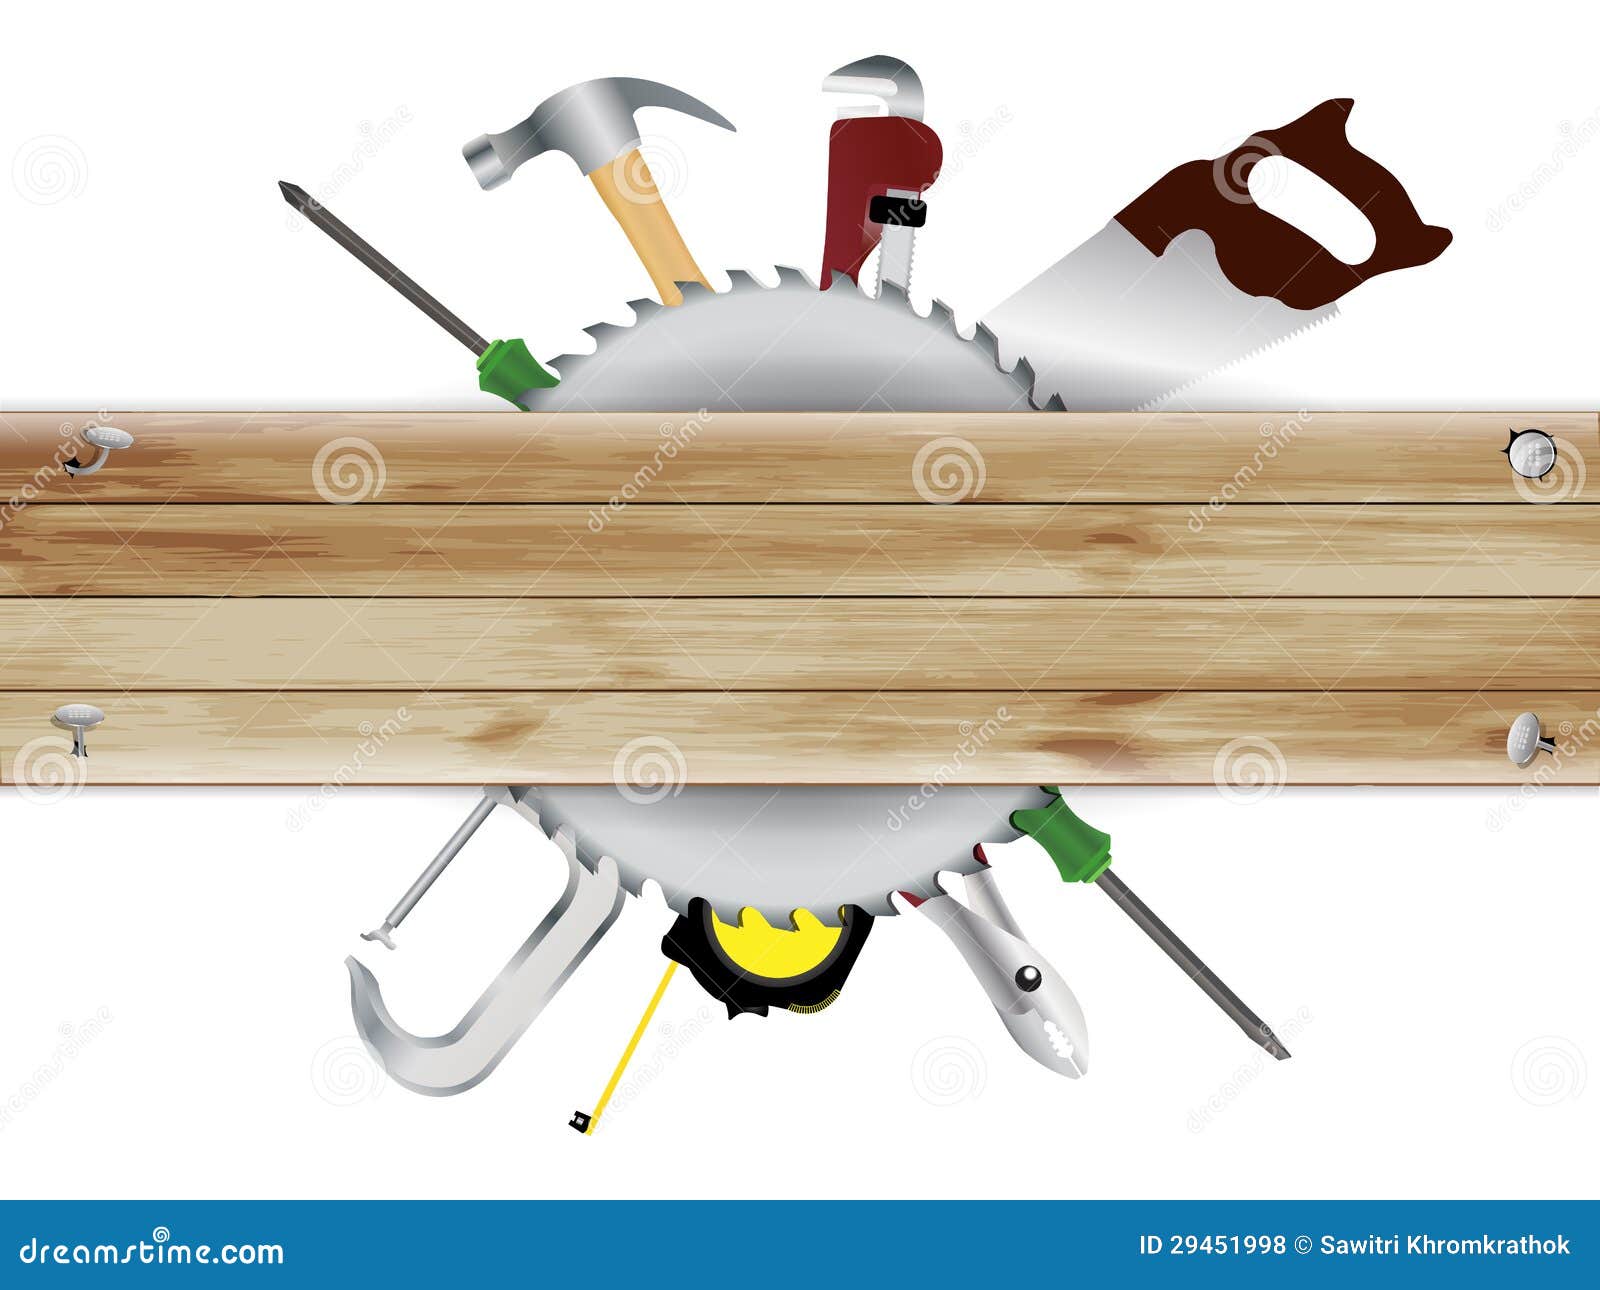 woodworking tools clipart - photo #20